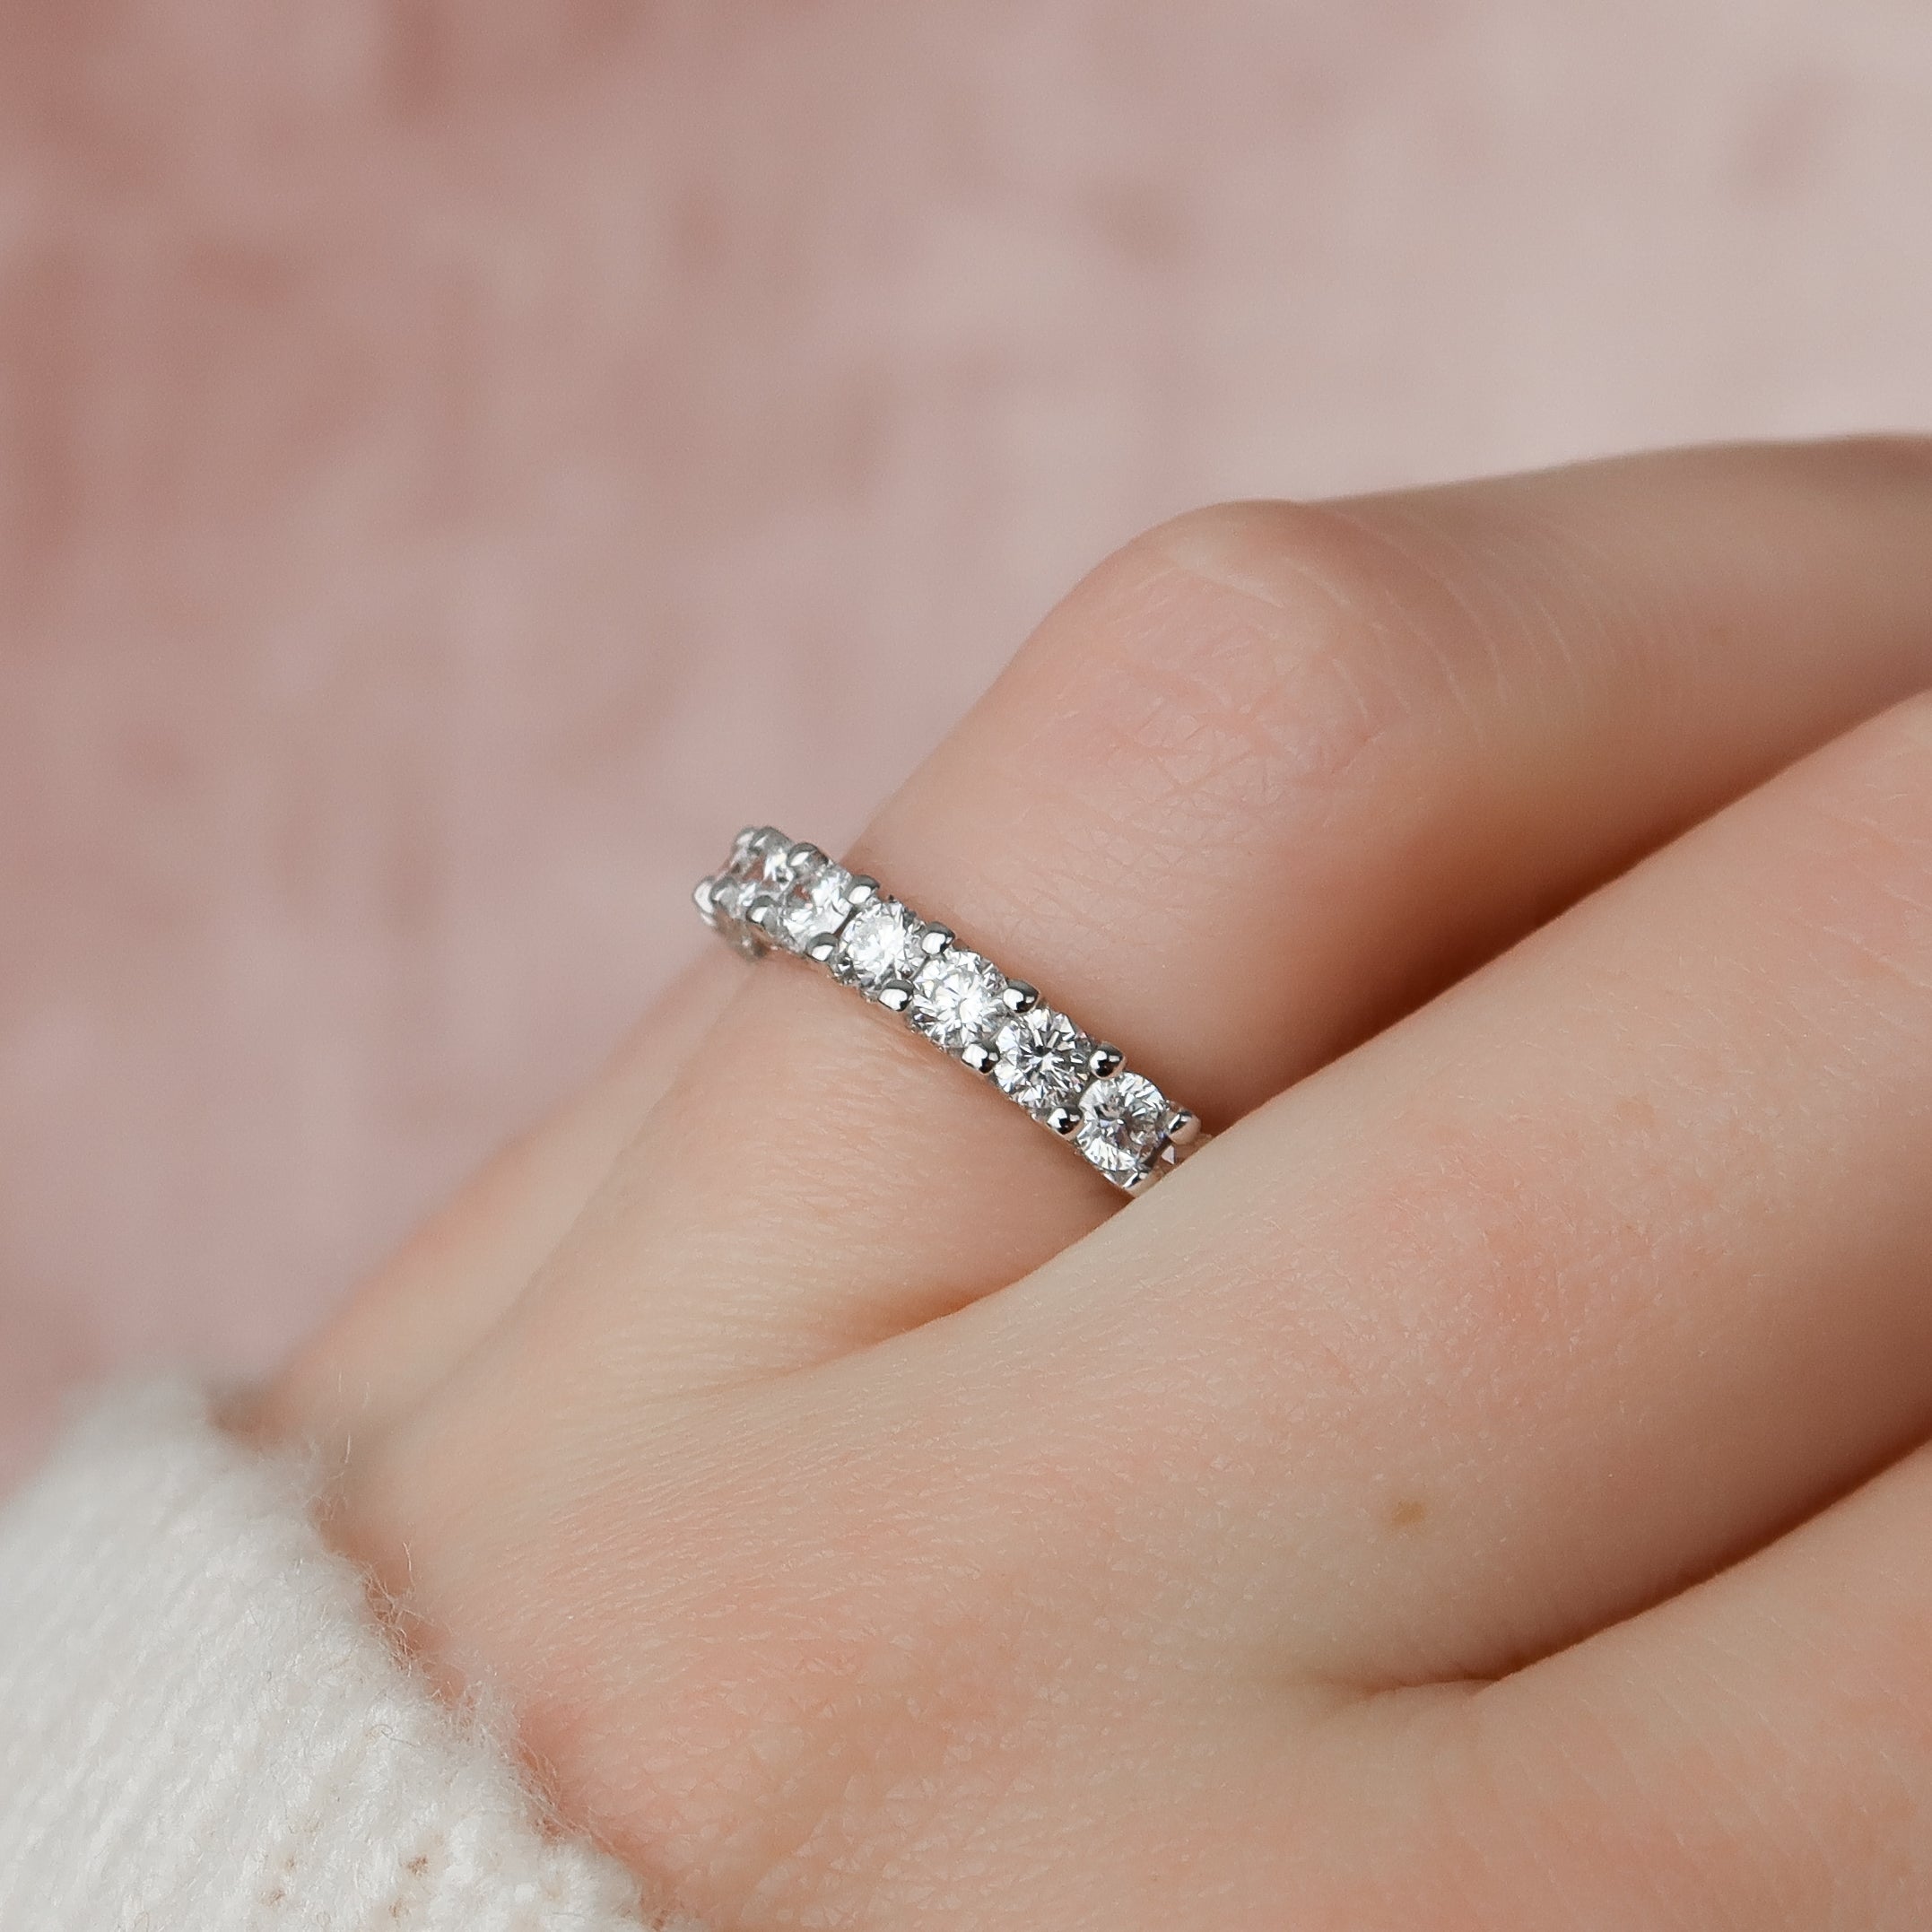 What Are Eternity Rings